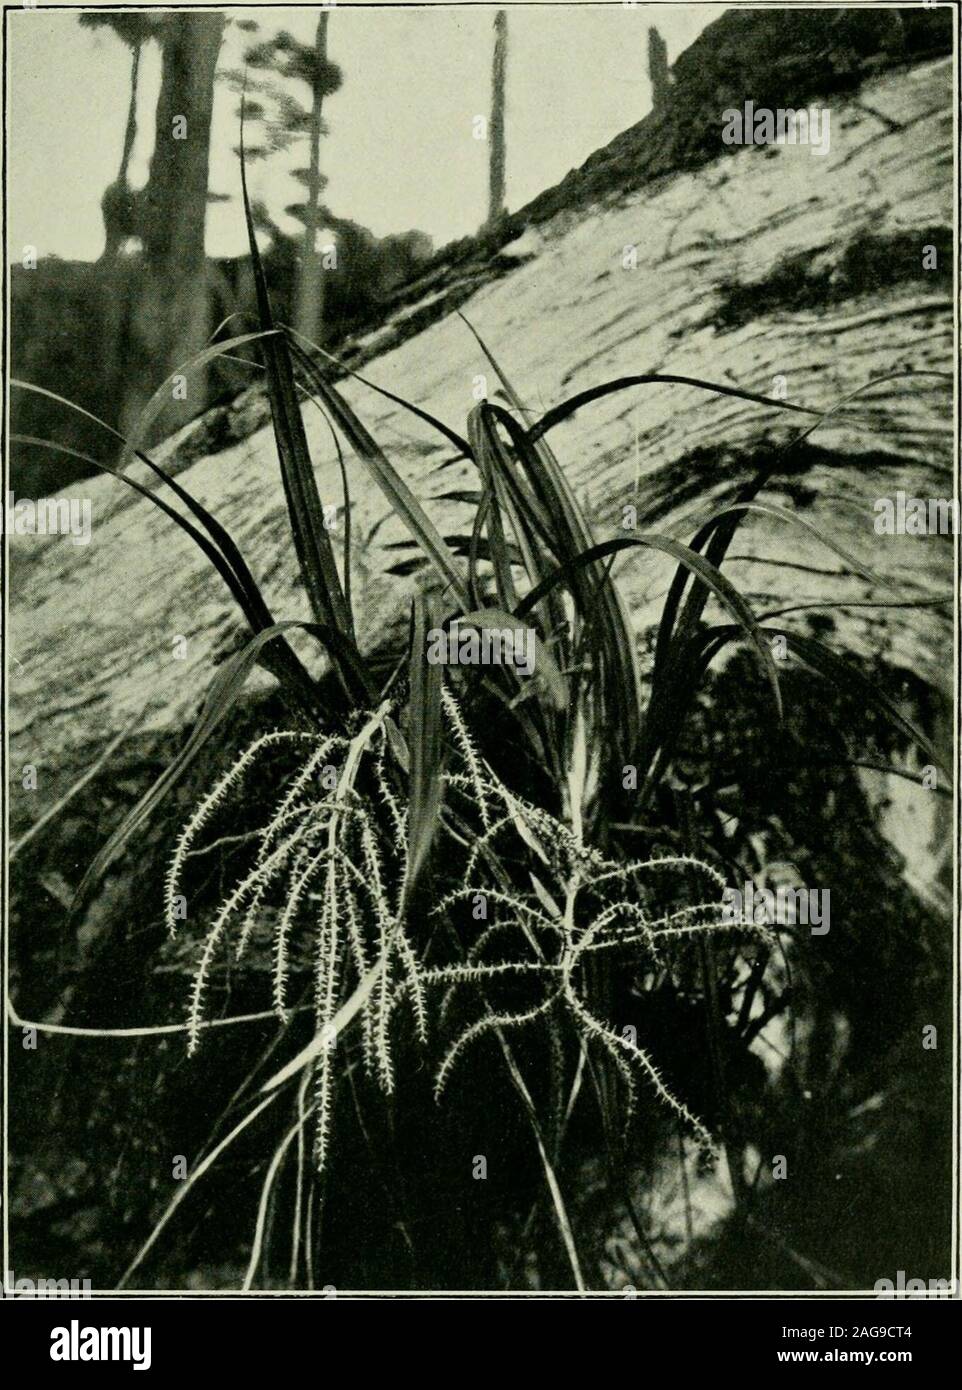 . Plants of New Zealand. g green,Even a dry chip, flying from the axe, will, if it falls into a dampplace, root and bud. The fibre of the leaves is perhaps strongerthan that of the flax (Phormium), and is much used by thesettlers in place of twine. The leaves are well adapted forthe making of paper. The flowers of the various kinds are all white or cream-coloured, and give out a strong, sweet scent. They are muchvisited by bees. The fruit is not capsular, as is usual amongthe liliaceae, but succulent, and contains a number of angularblack seeds. The cabbage-tree differs from most of its tribe Stock Photo